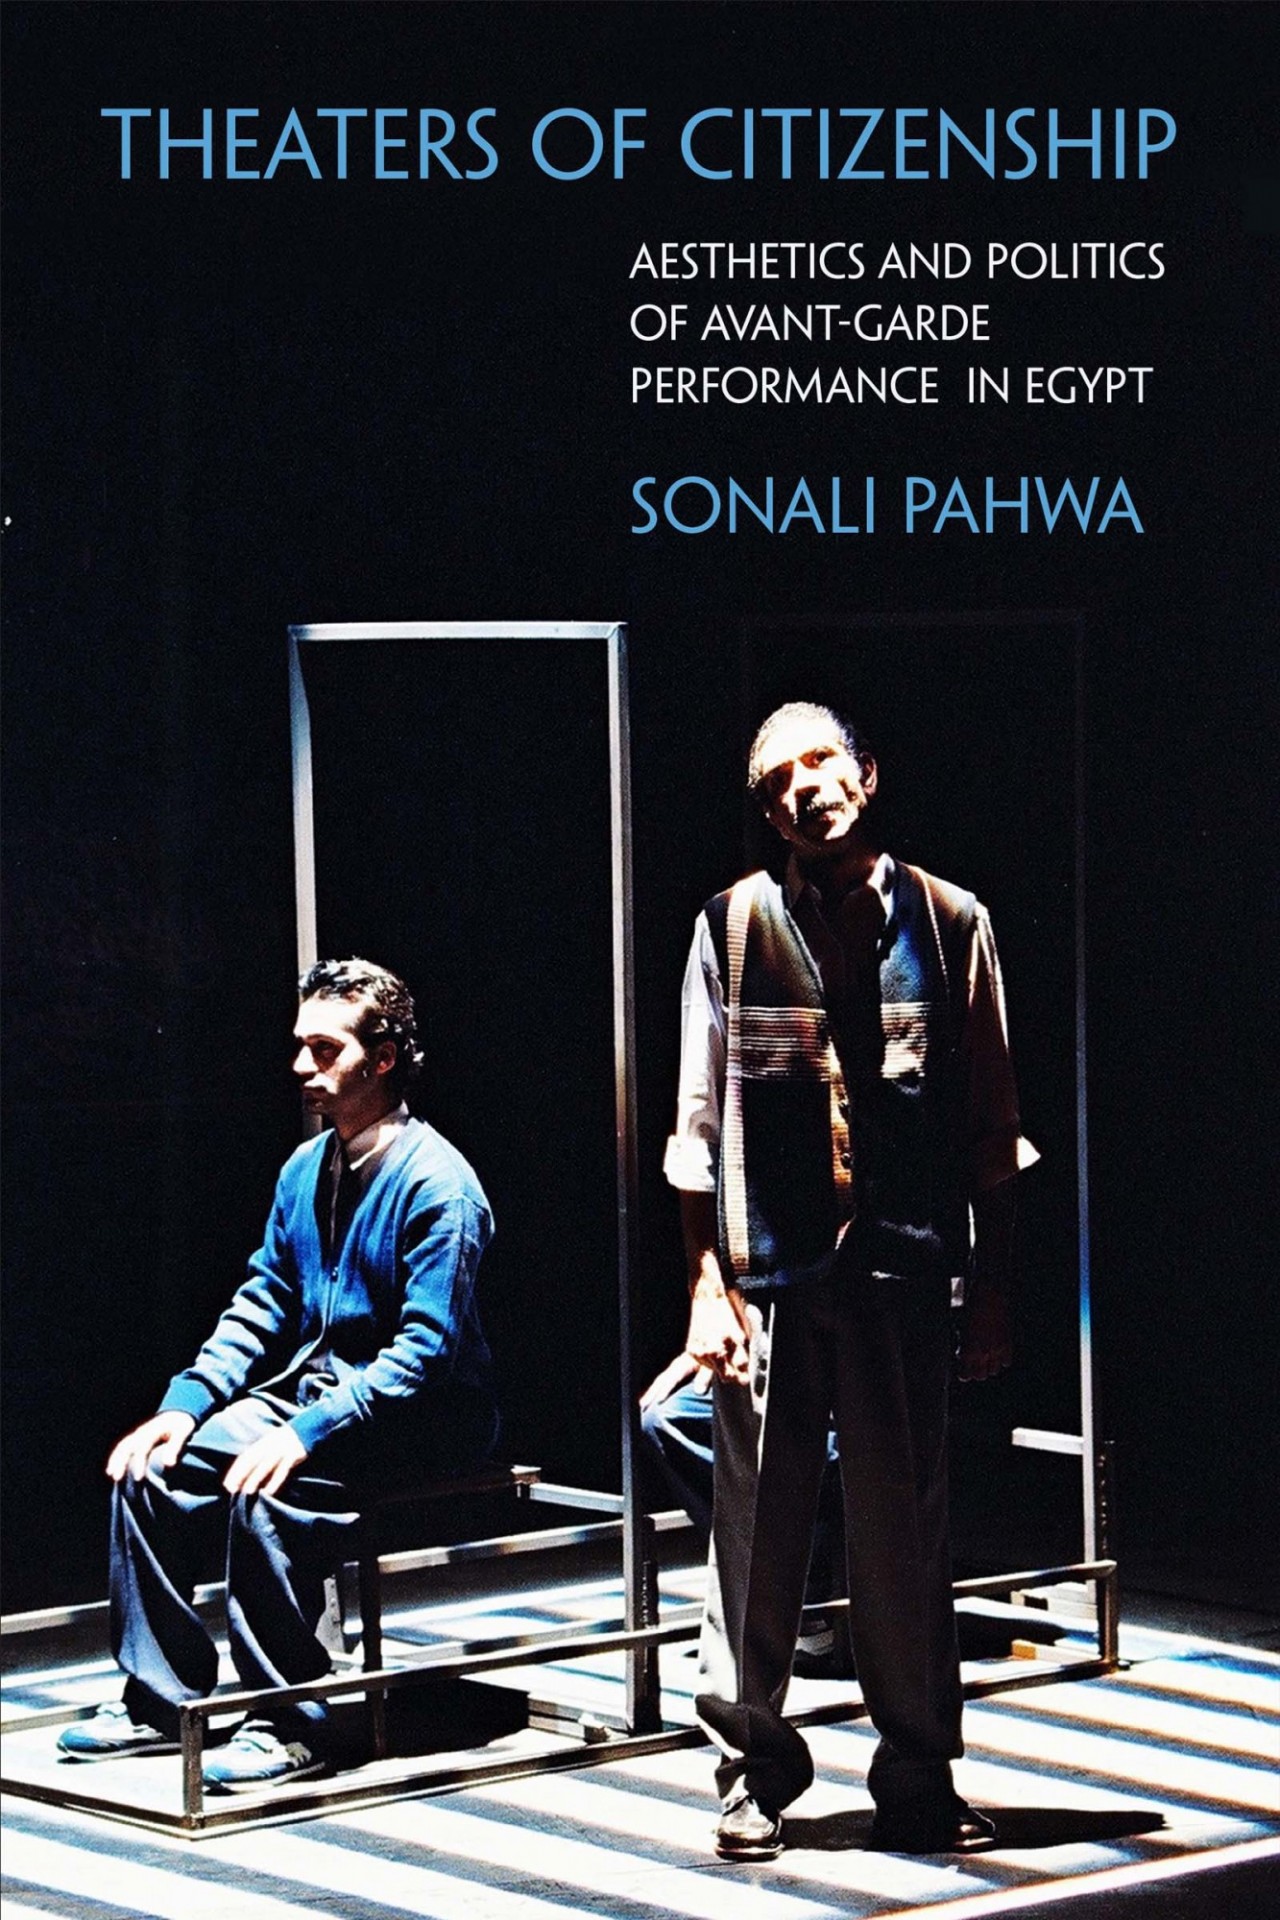 Book Cover: Sonali Pawha, Theaters of Citizenship: Aesthetics and Politics of Avant-Garde Performance in Egypt